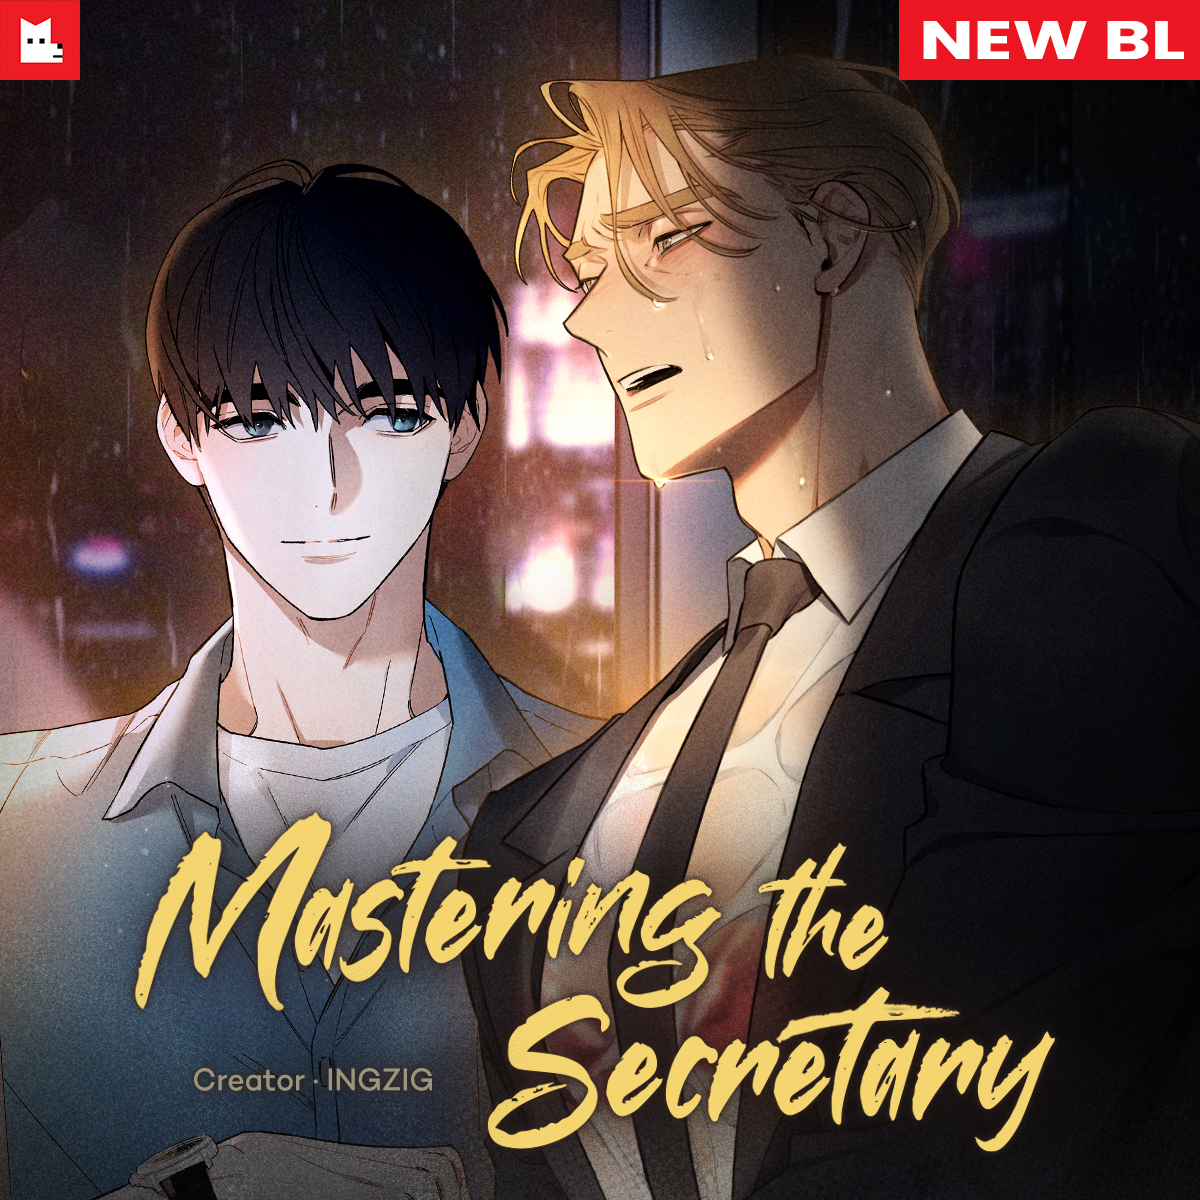 🤵‍♂️𝗡𝗘𝗪 𝗕𝗟🤵‍♂️ Secretary Han is in for an unexpected surprise 😮 from his young master! ⁠
⁠
🖤𝙍𝙚𝙖𝙙 𝙉𝙤𝙬!➡️bit.ly/tw_mastering🔗⁠
⁠
#MasteringtheSecretary #shortstories #lezhincomics #blcomics #BoysLove